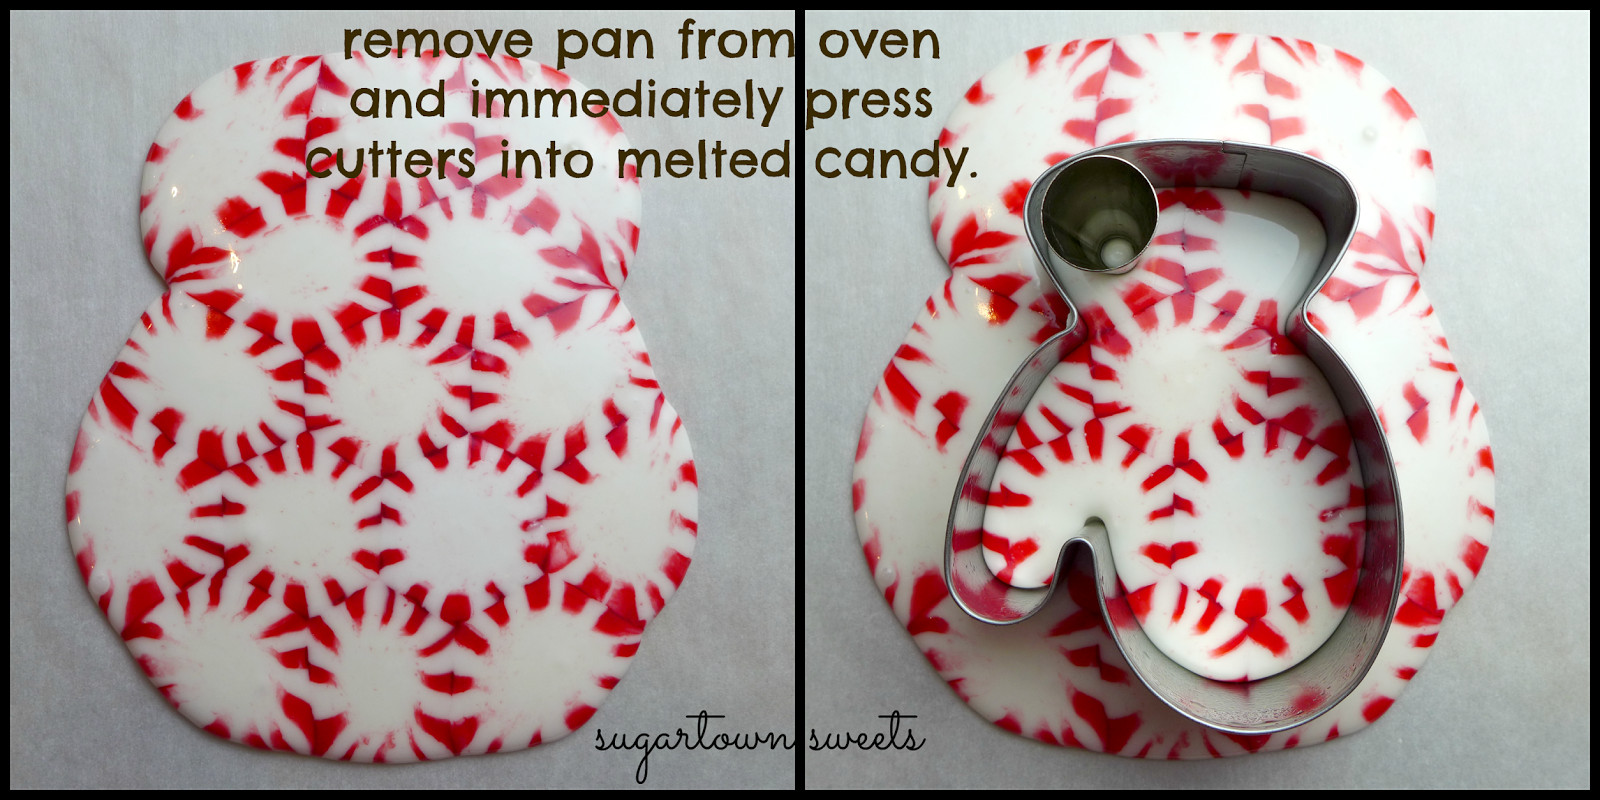 Peppermint Candy Christmas Ornaments
 Sugartown Sweets Melted Peppermint Ornaments Mittens